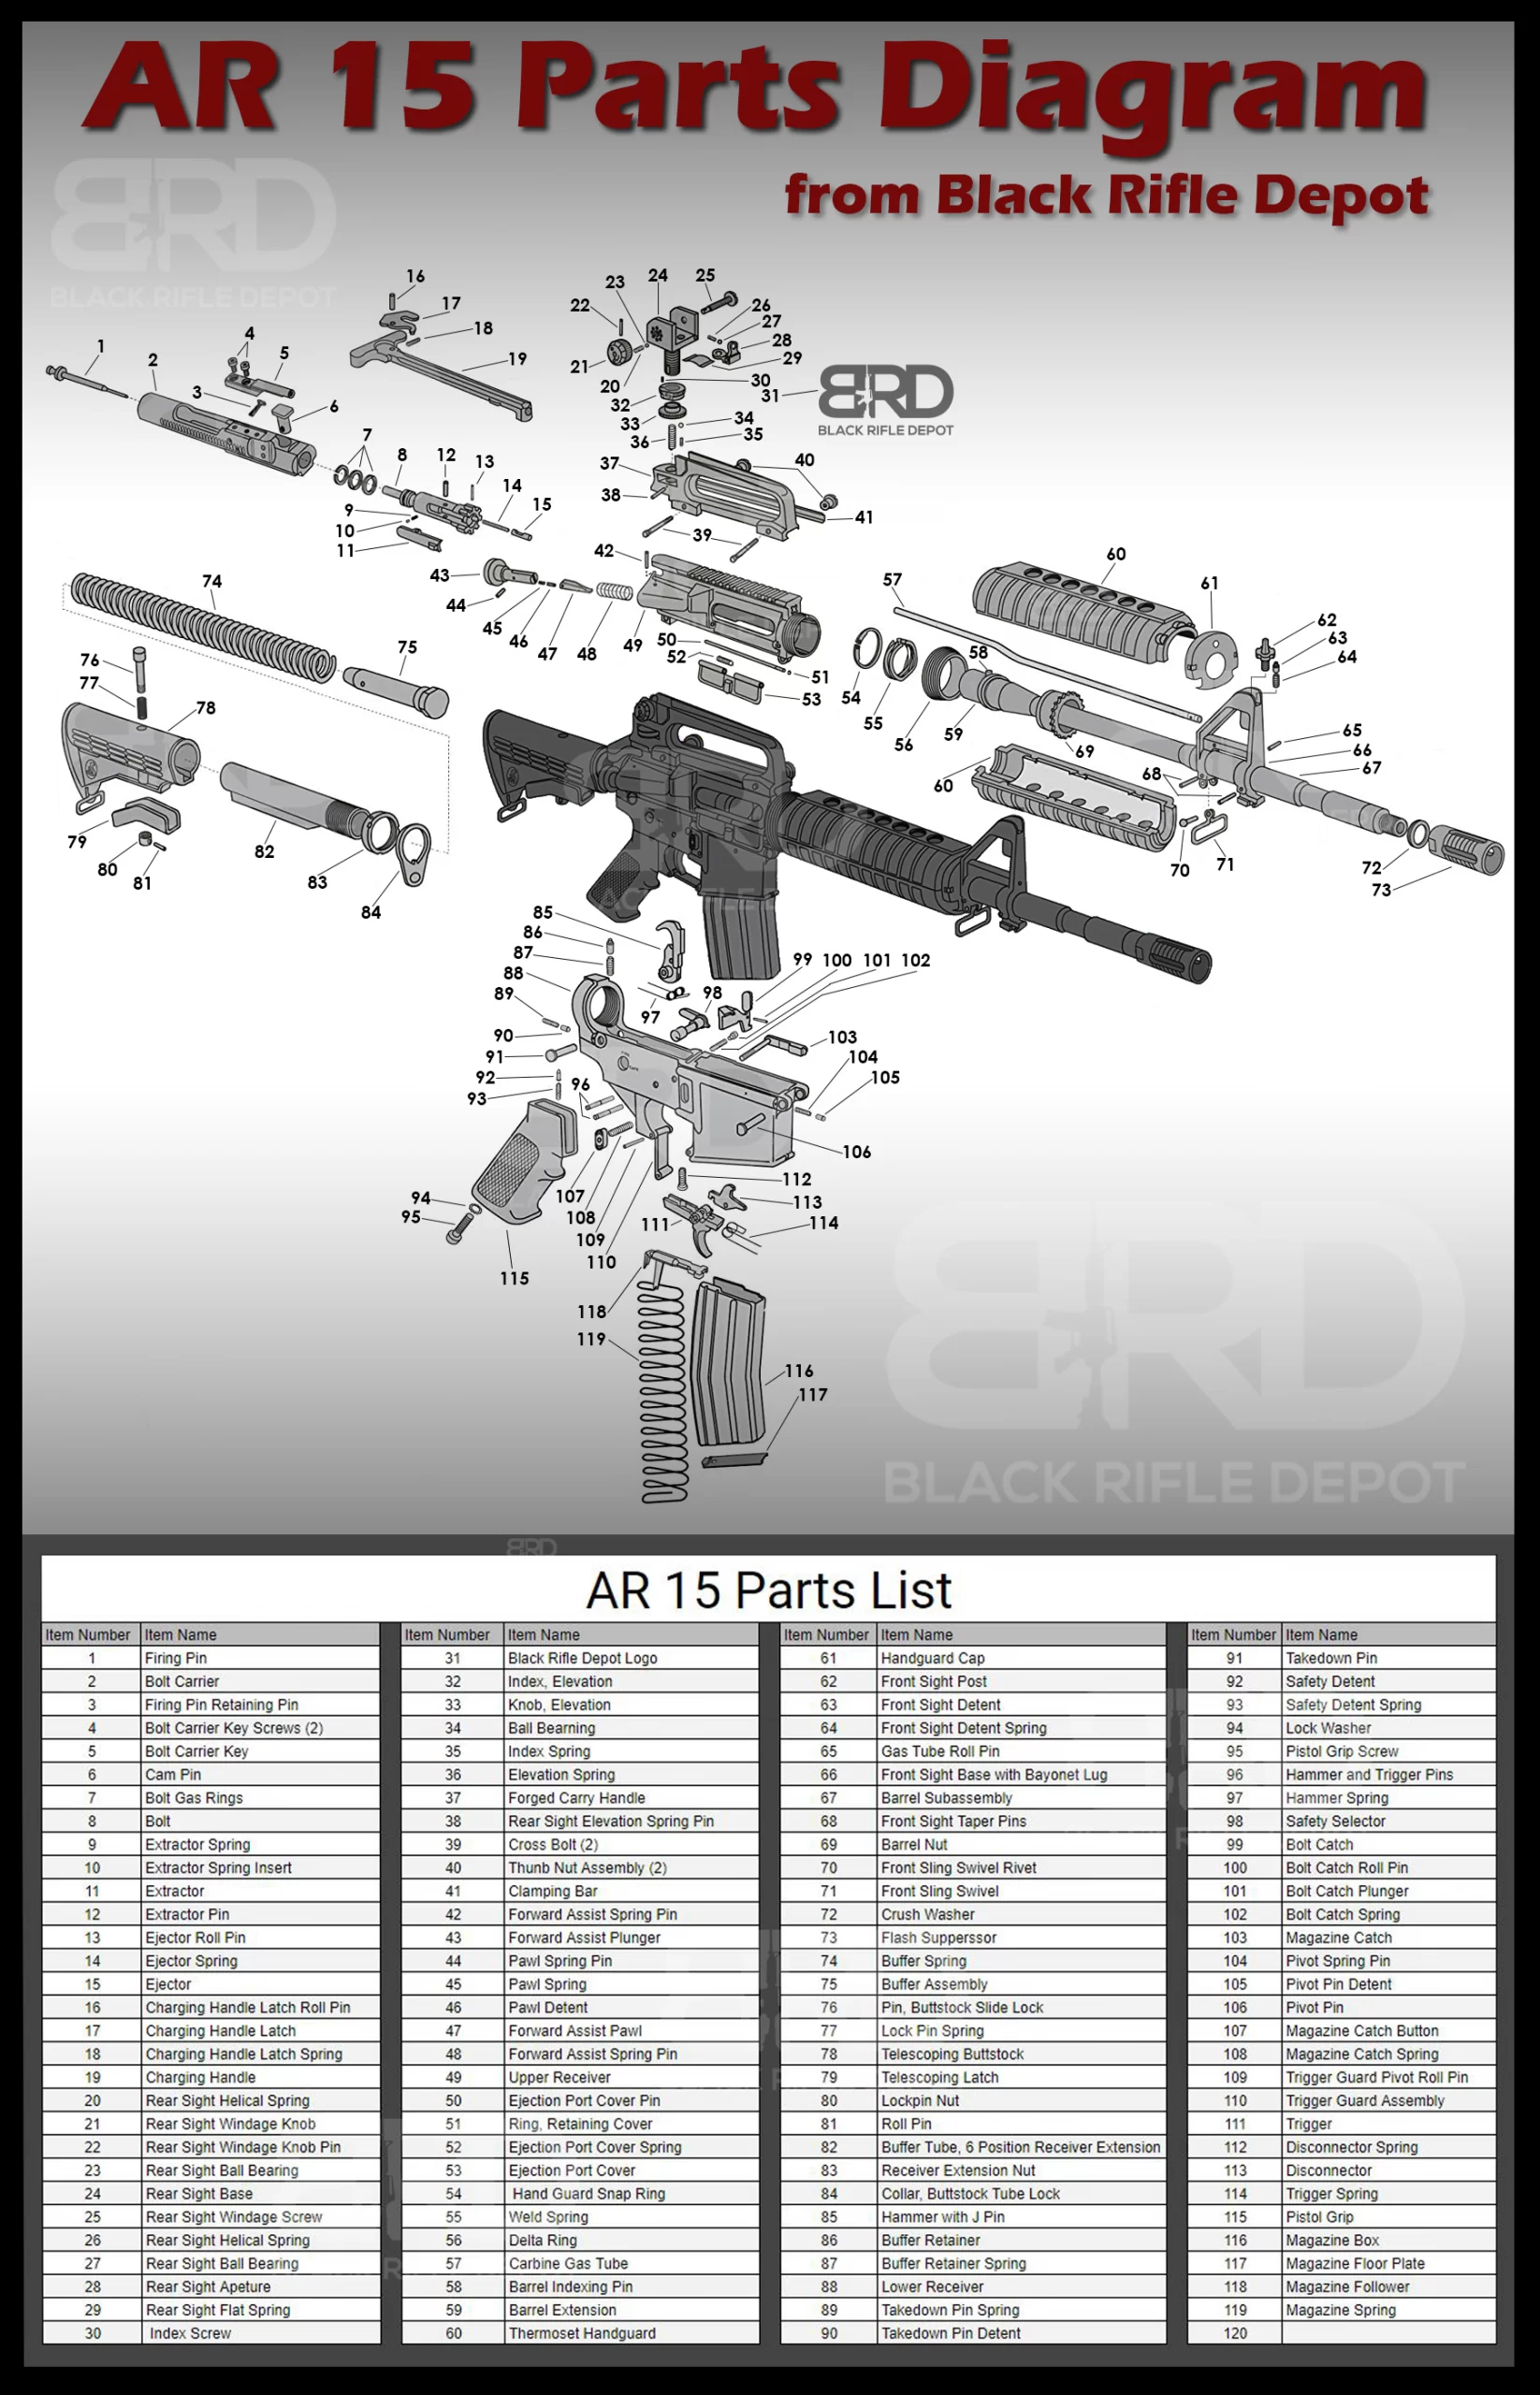 An AR15 parts diagram from Black Rifle Depot. 